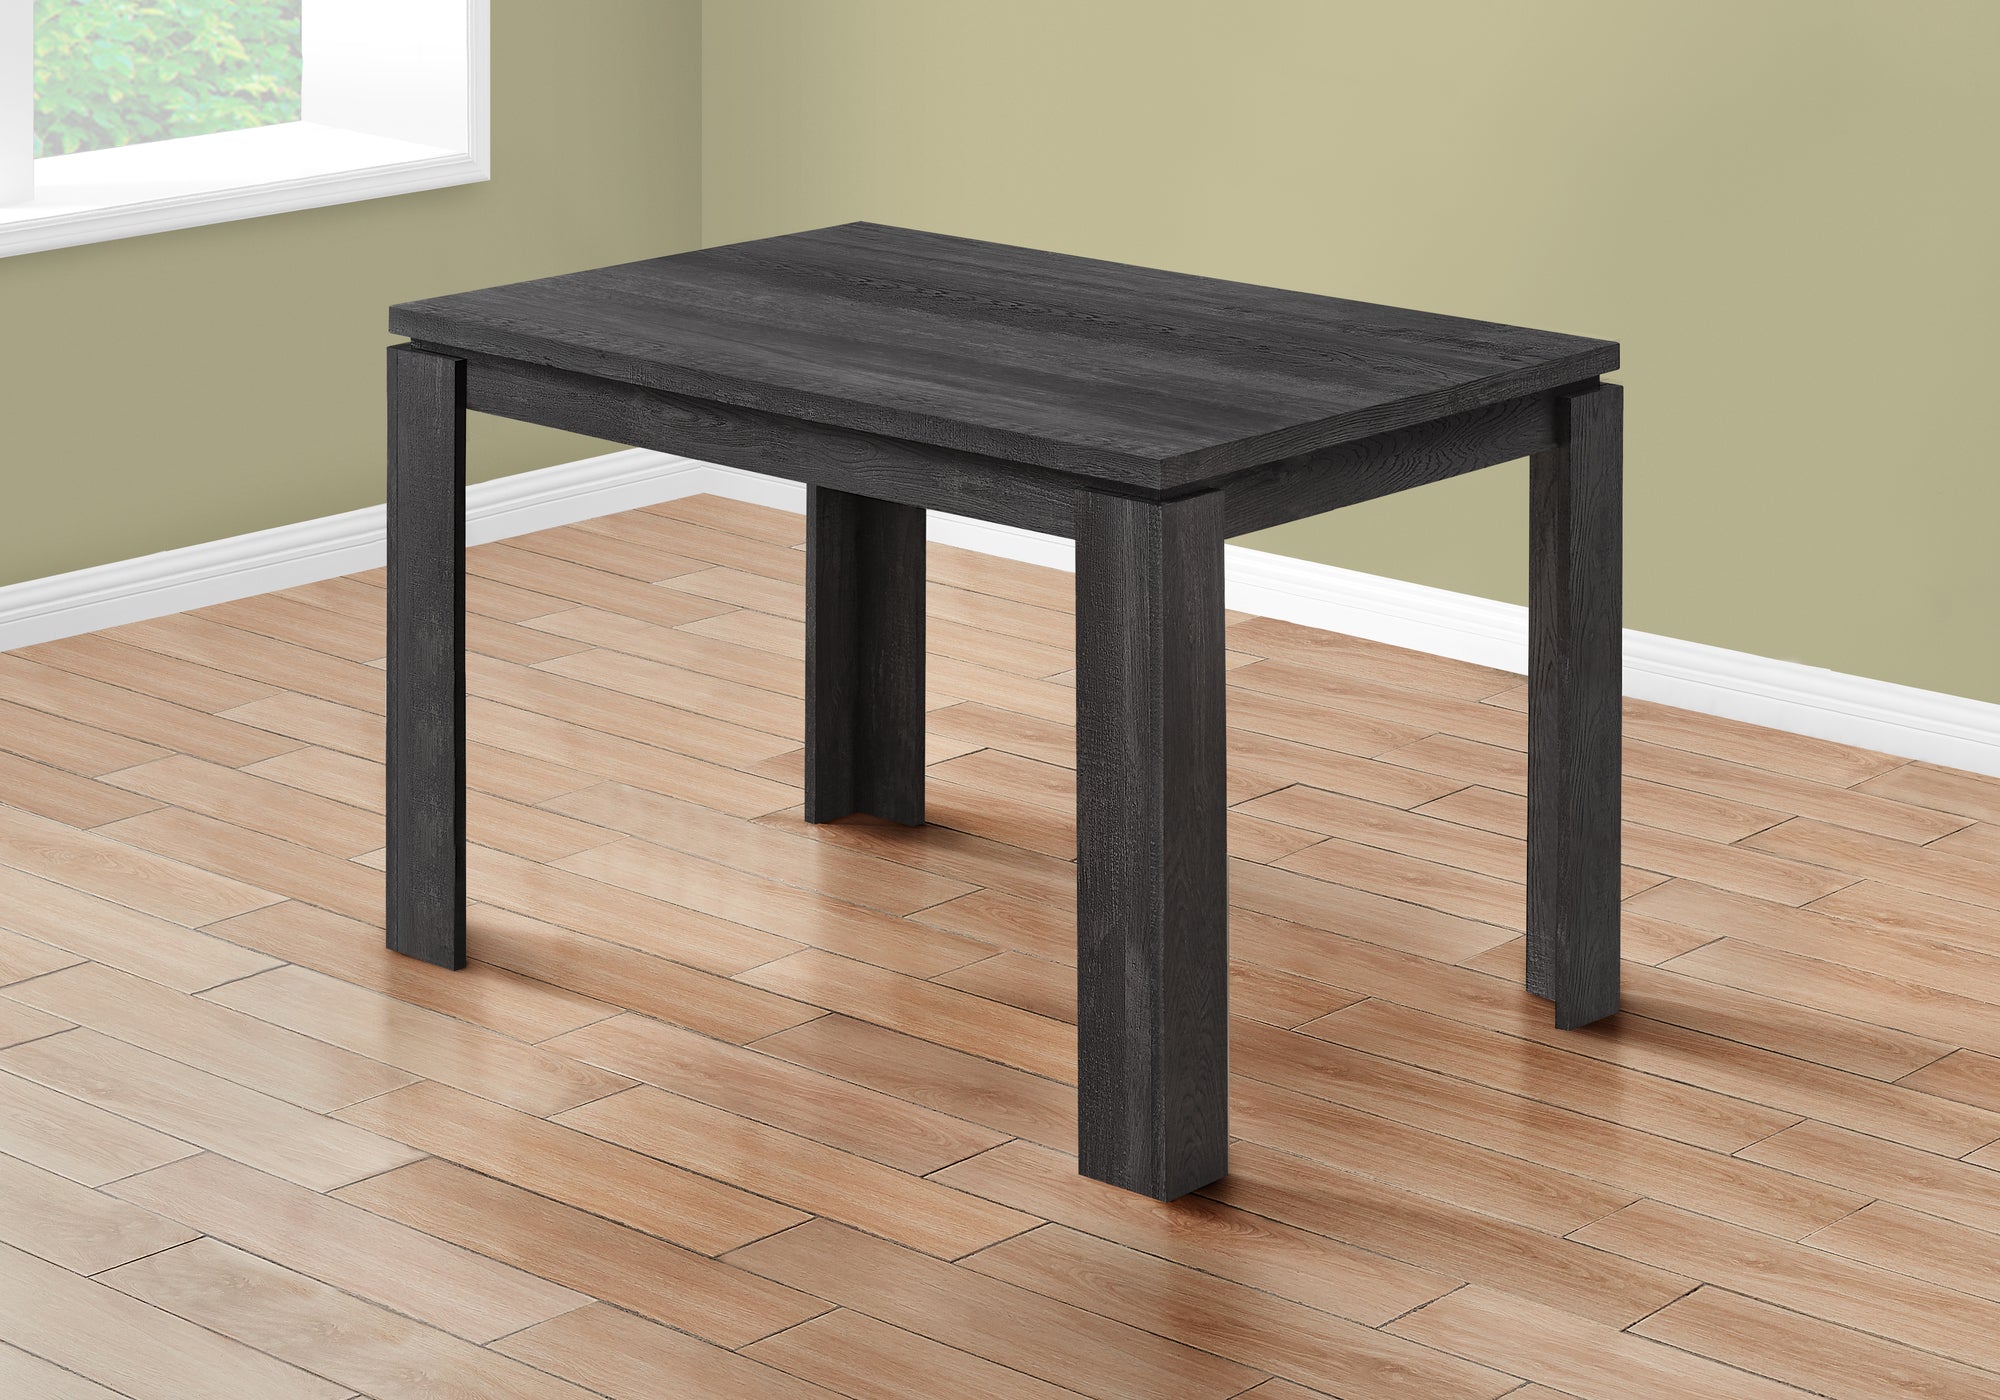 MN-751166    Dining Table, 48" Rectangular, Kitchen, Dining Room, Laminate, Black Reclaimed Wood Look, Contemporary, Modern